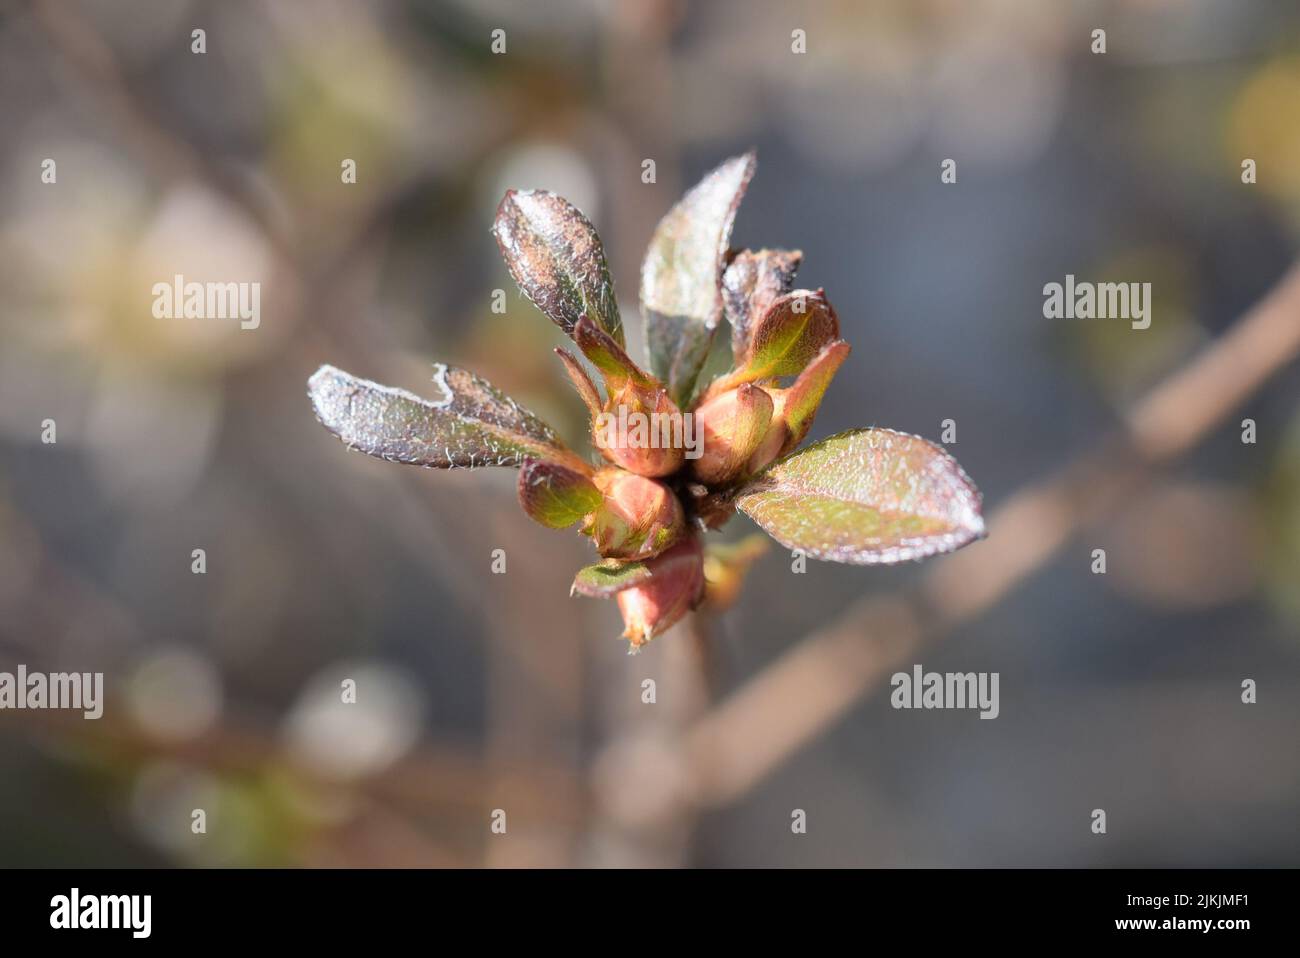 A closeup of a budding branch on a blurred background Stock Photo